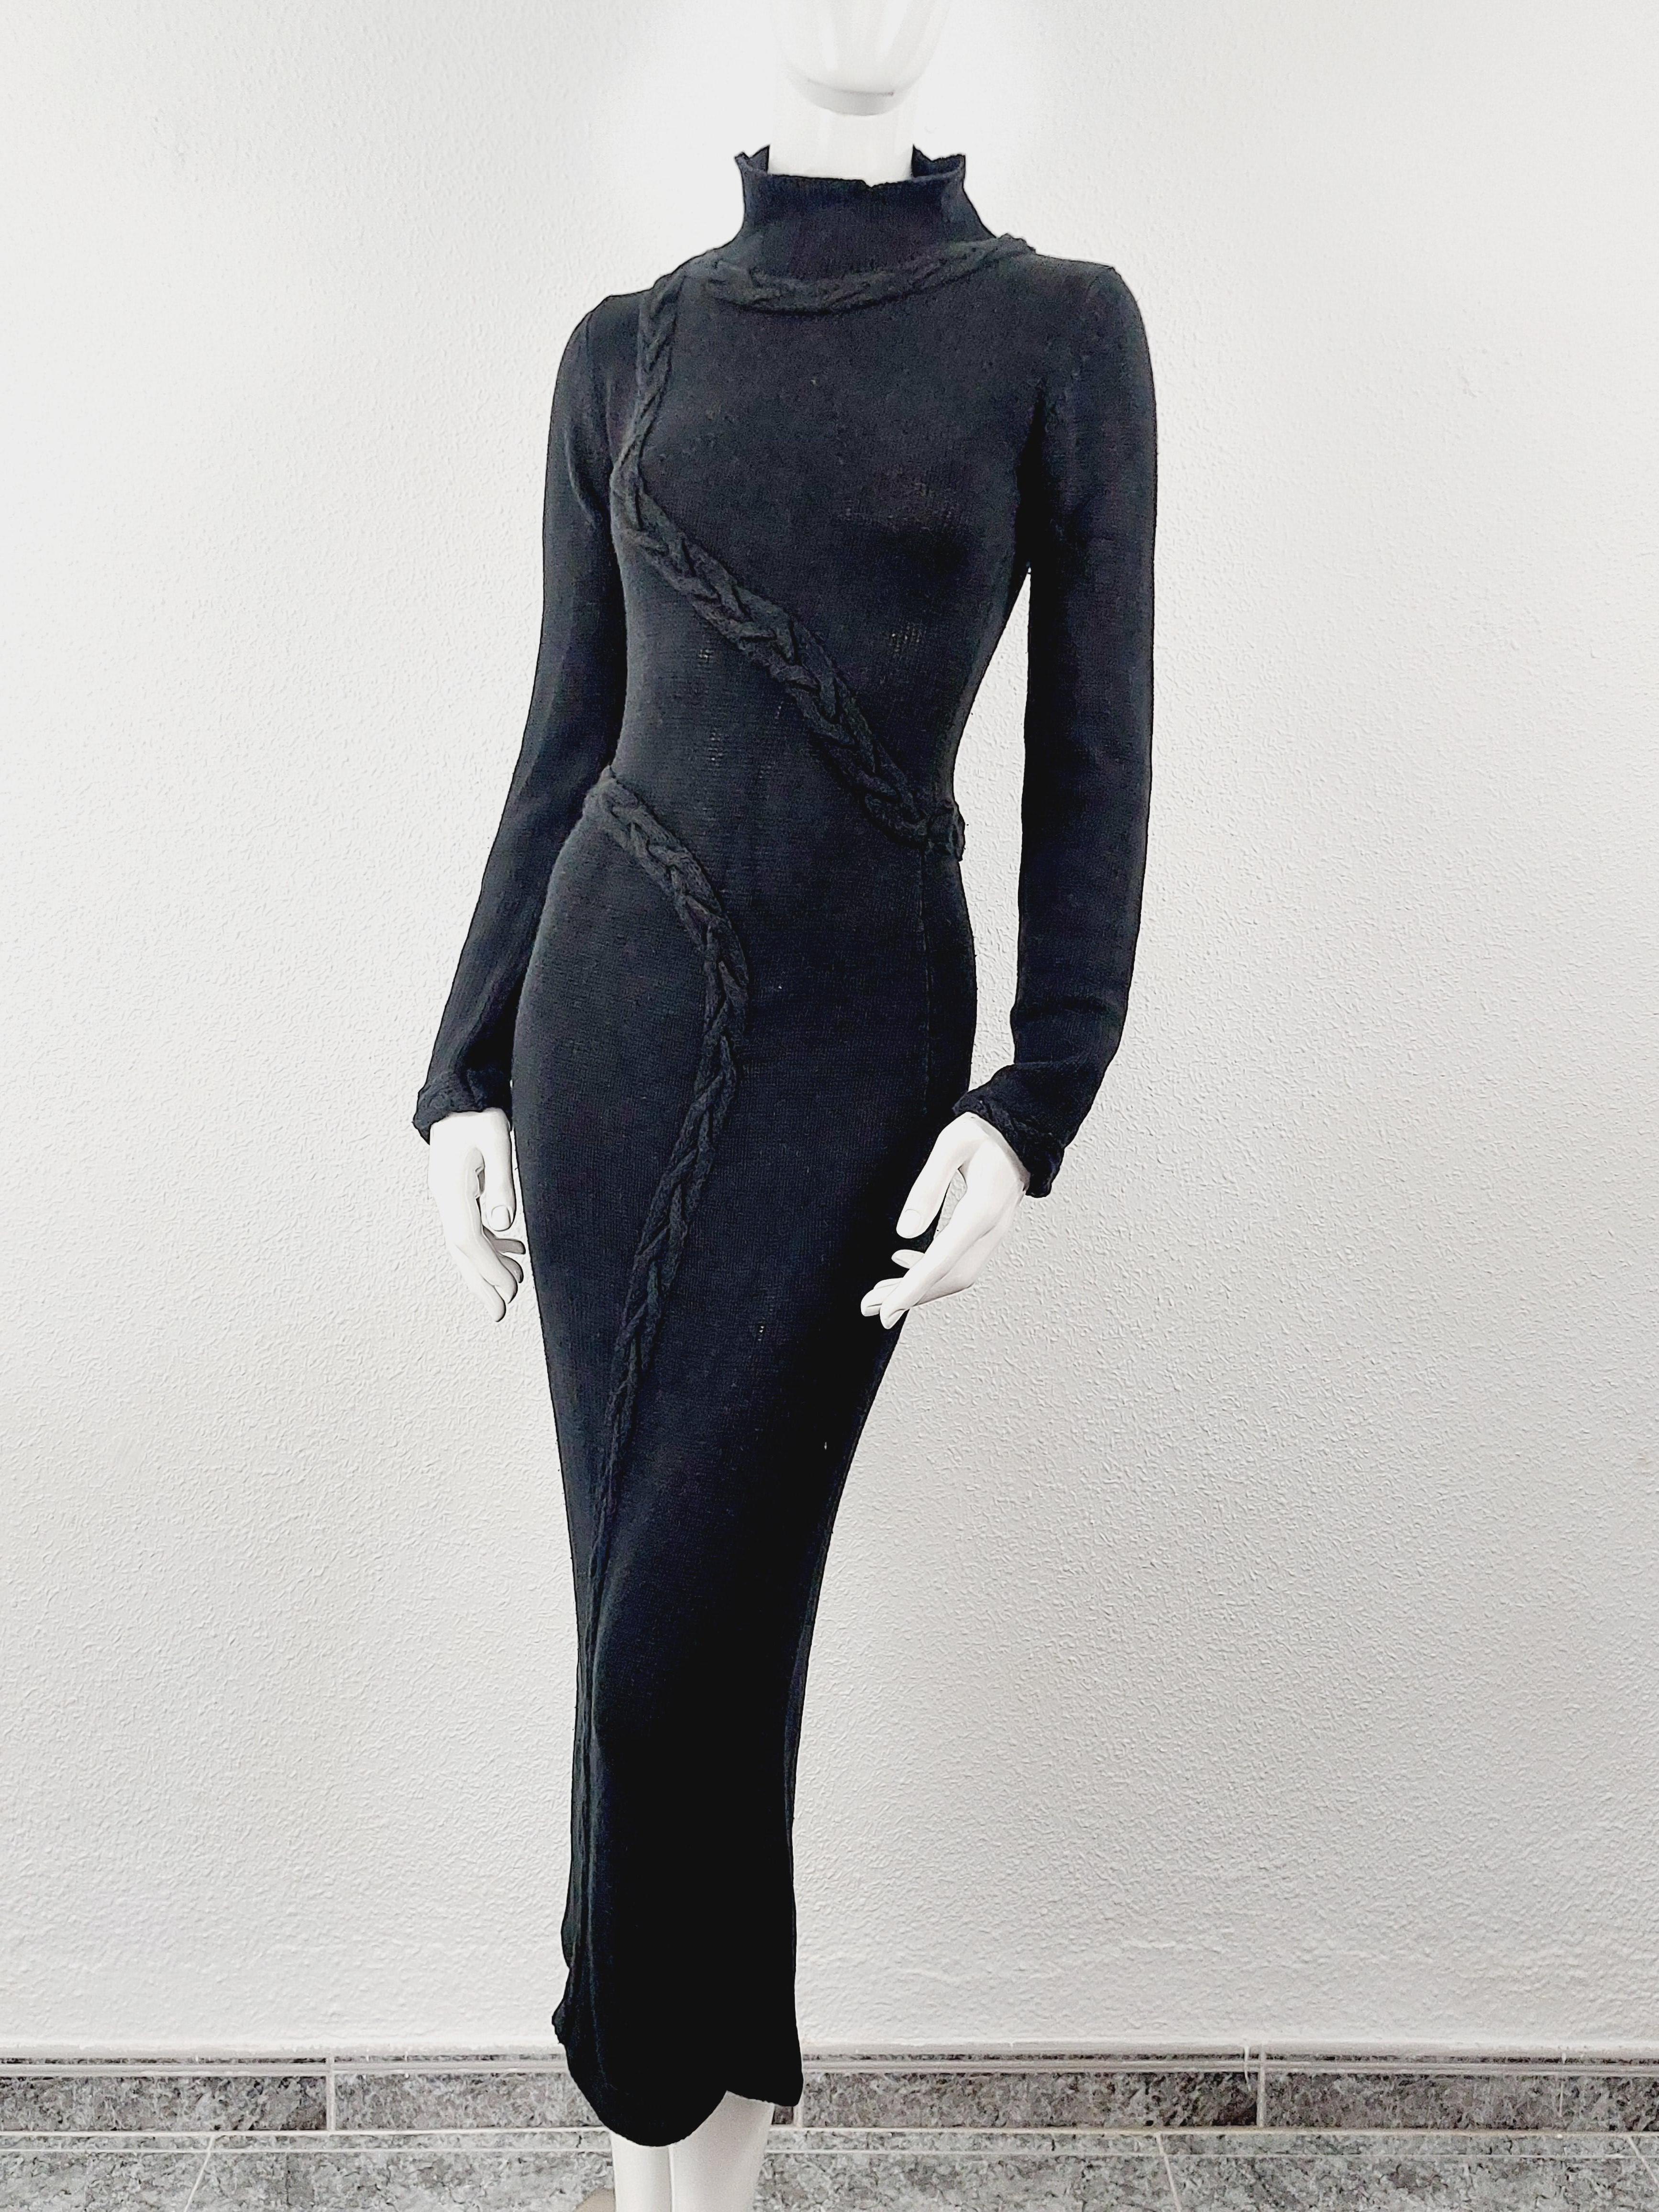 Thierry Mugler Braid Braided Knitted Black Embroidered Spiral Weave Maxi Dress In Excellent Condition For Sale In PARIS, FR